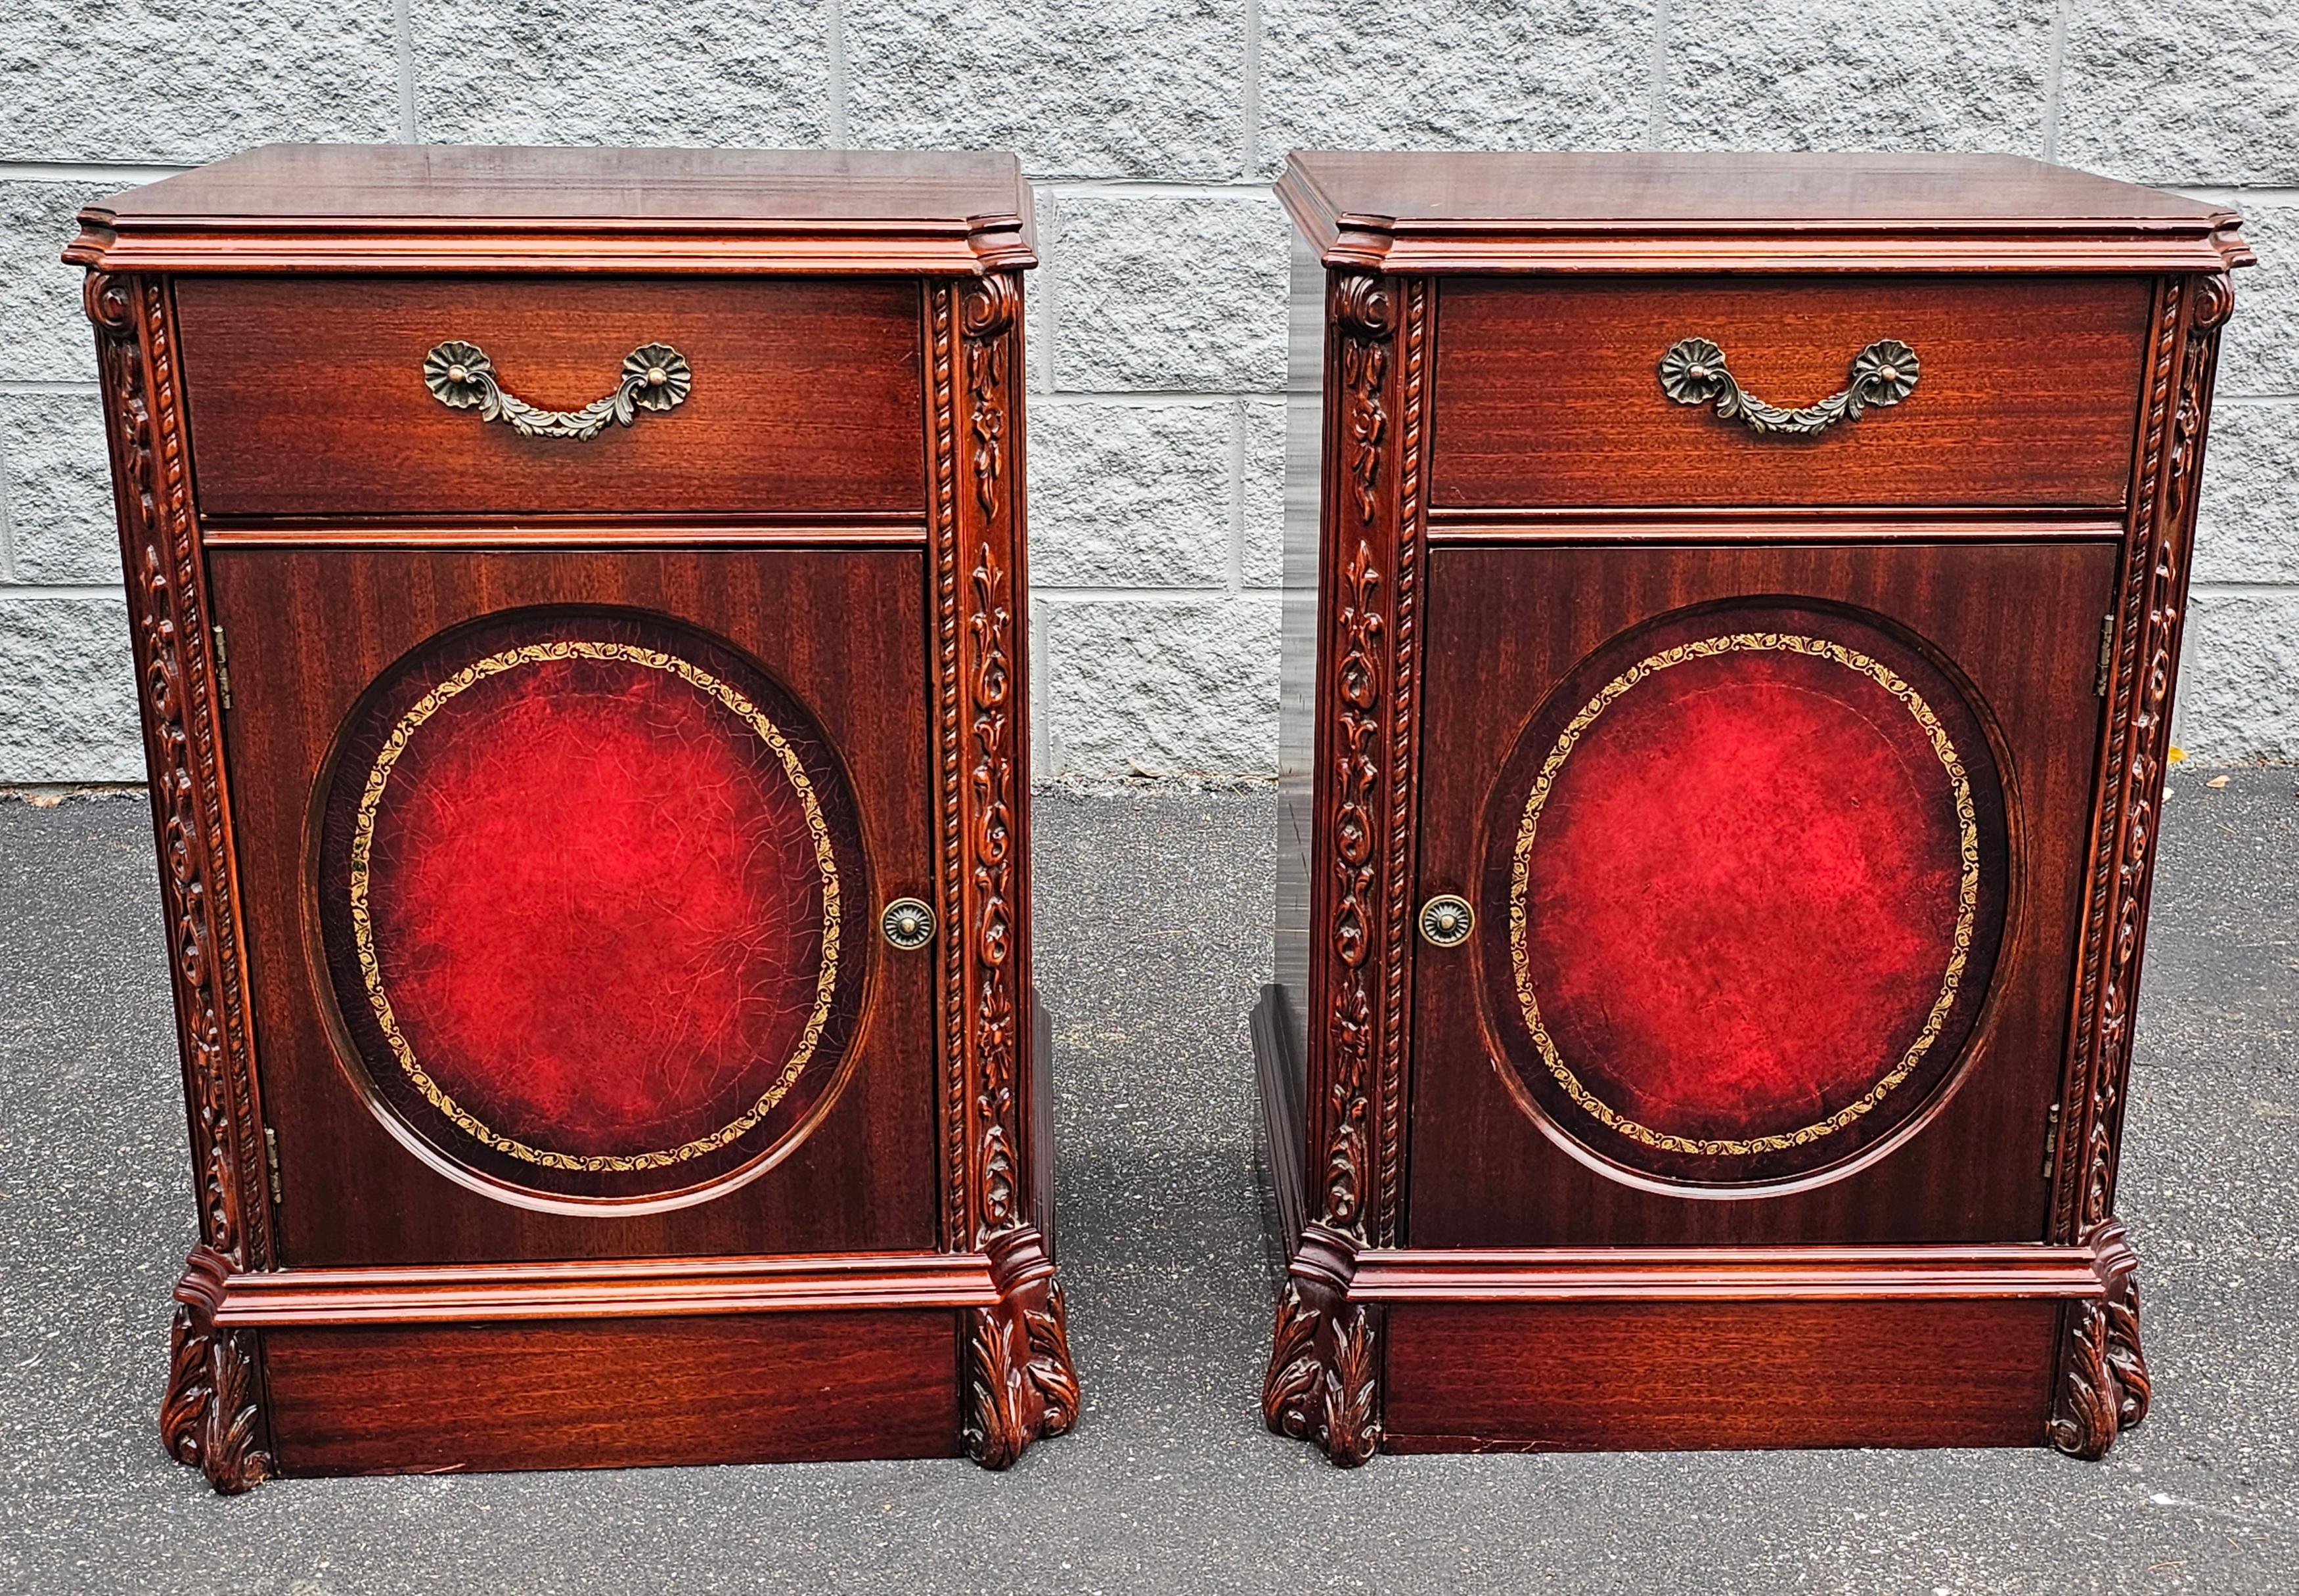 A Rare Pair of Hollywood Regency Style Mahogany and Stenciled Tooled Leather front Inset with carved corners side cabinets.
Versatile use to any room in you home or office. Measure 22